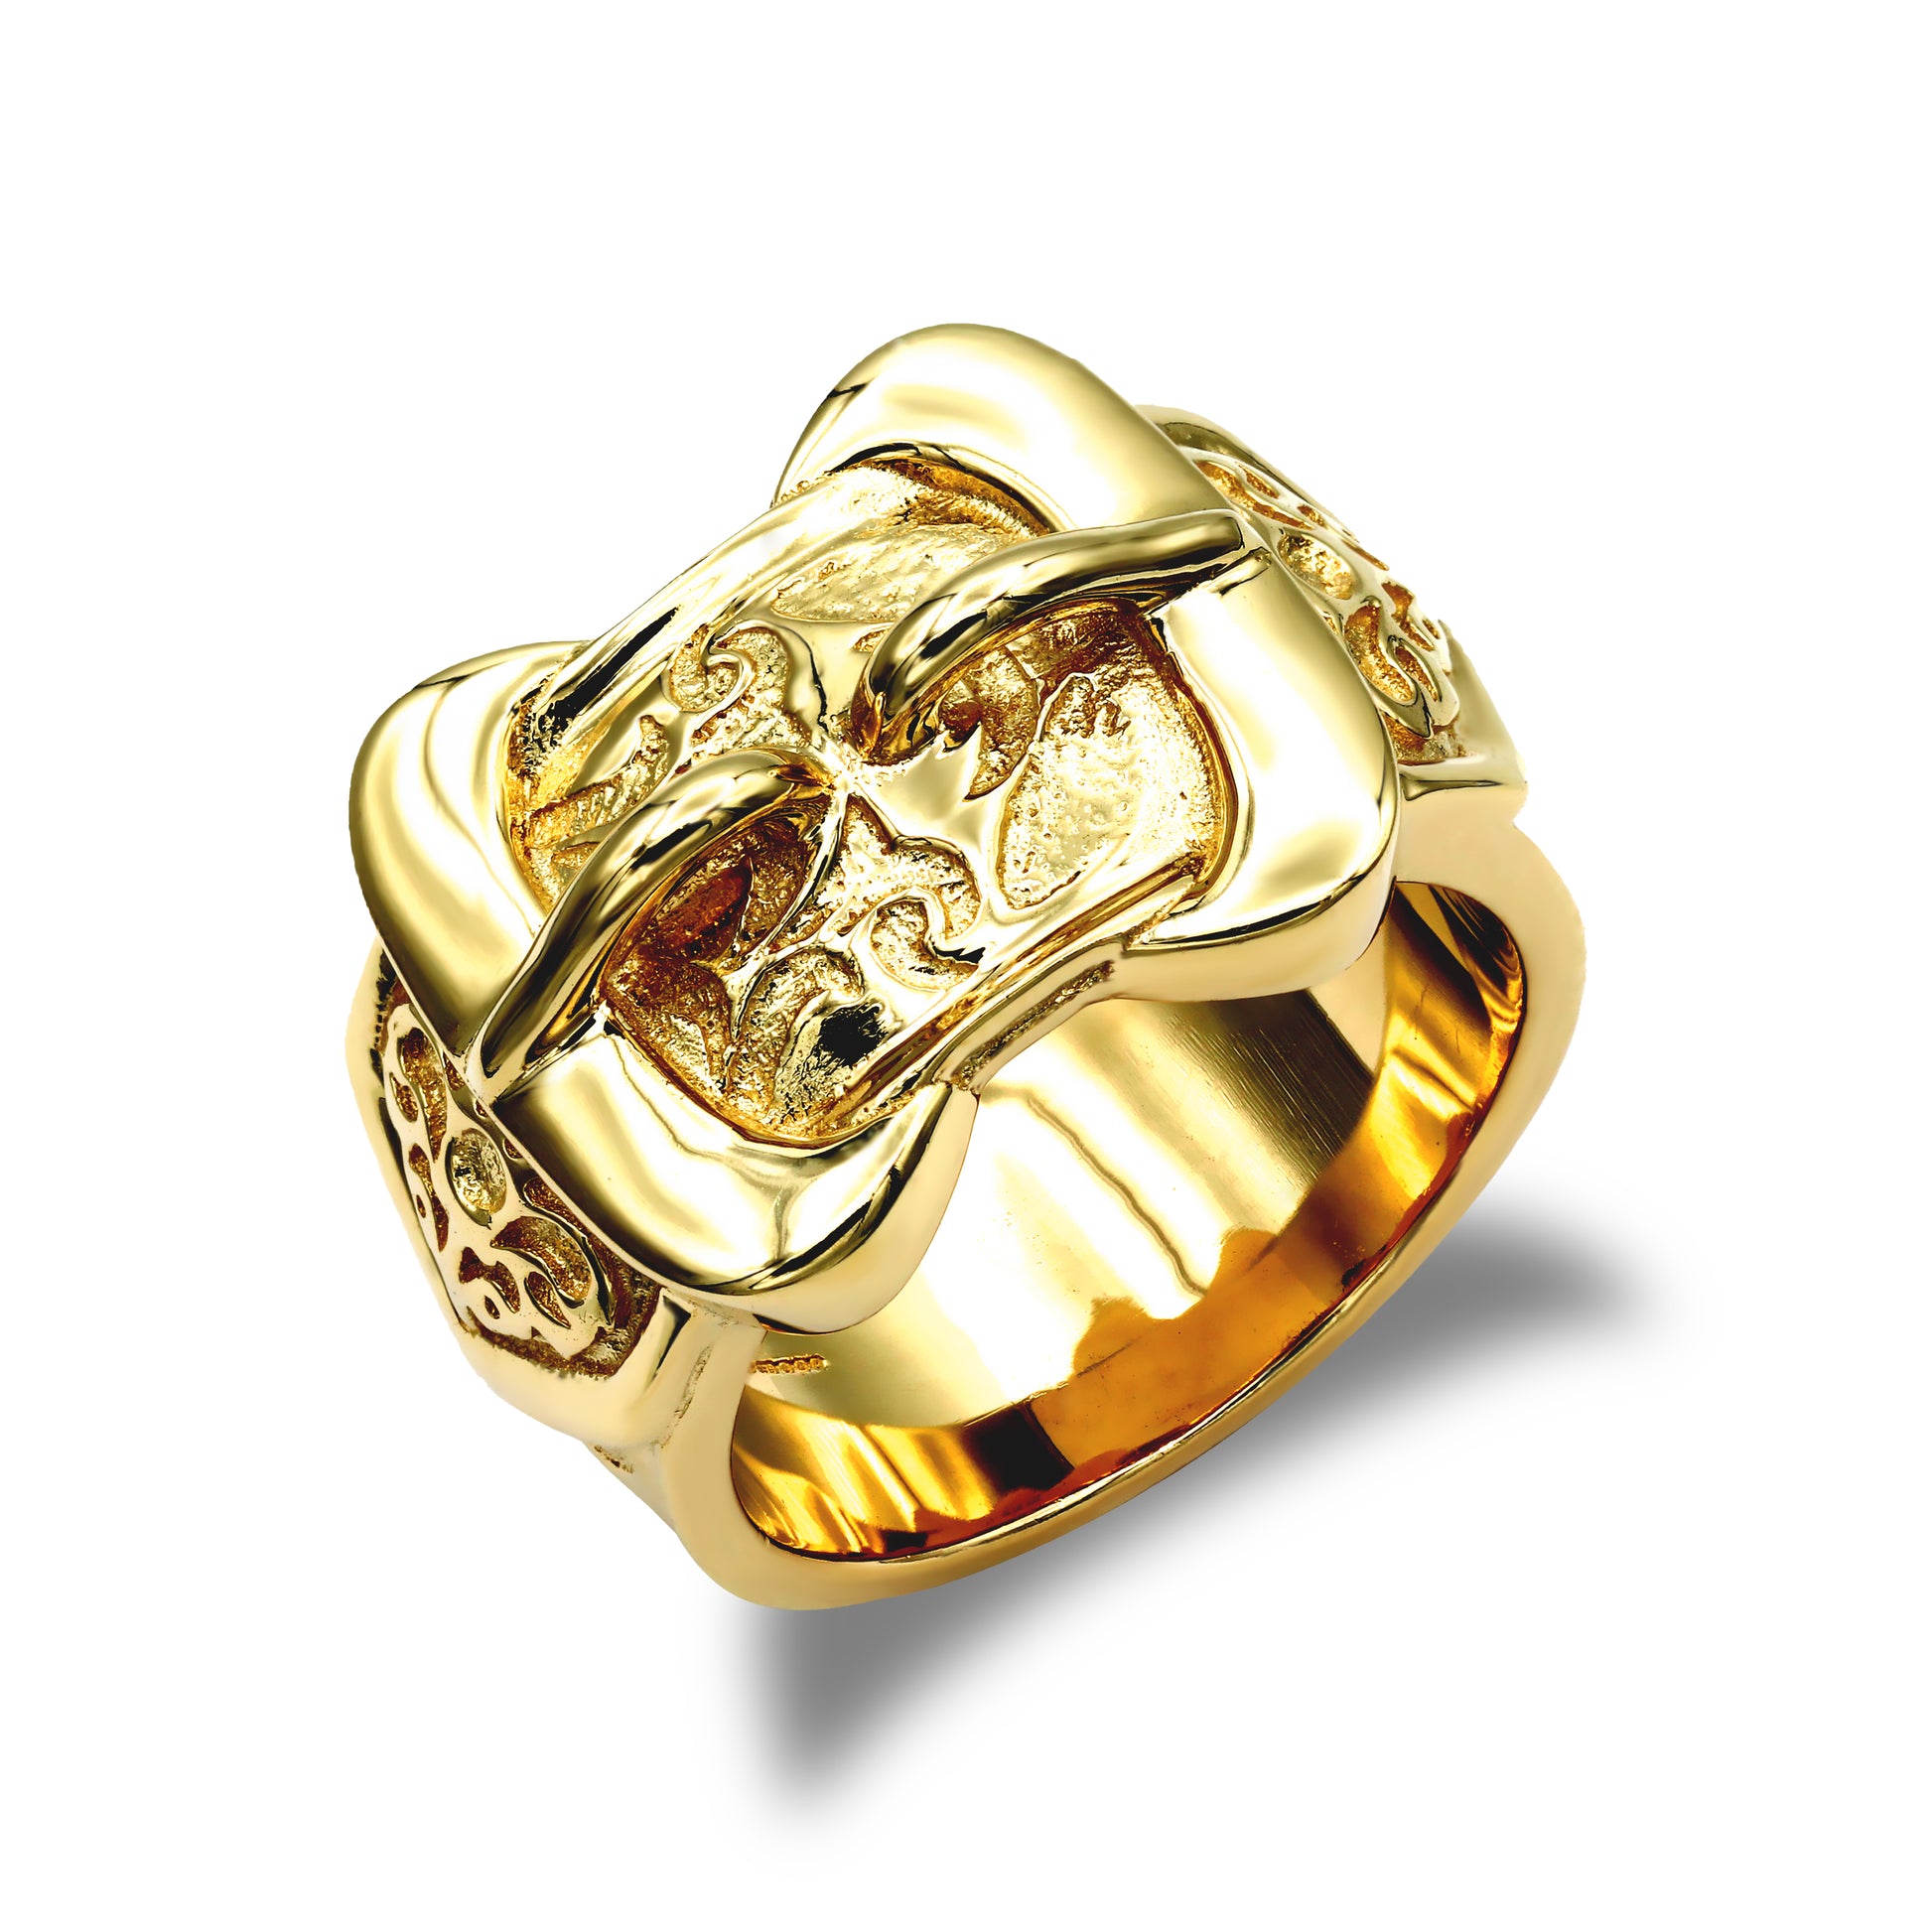 Mens Solid 9ct Gold  Double Buckle Ring - JRN026